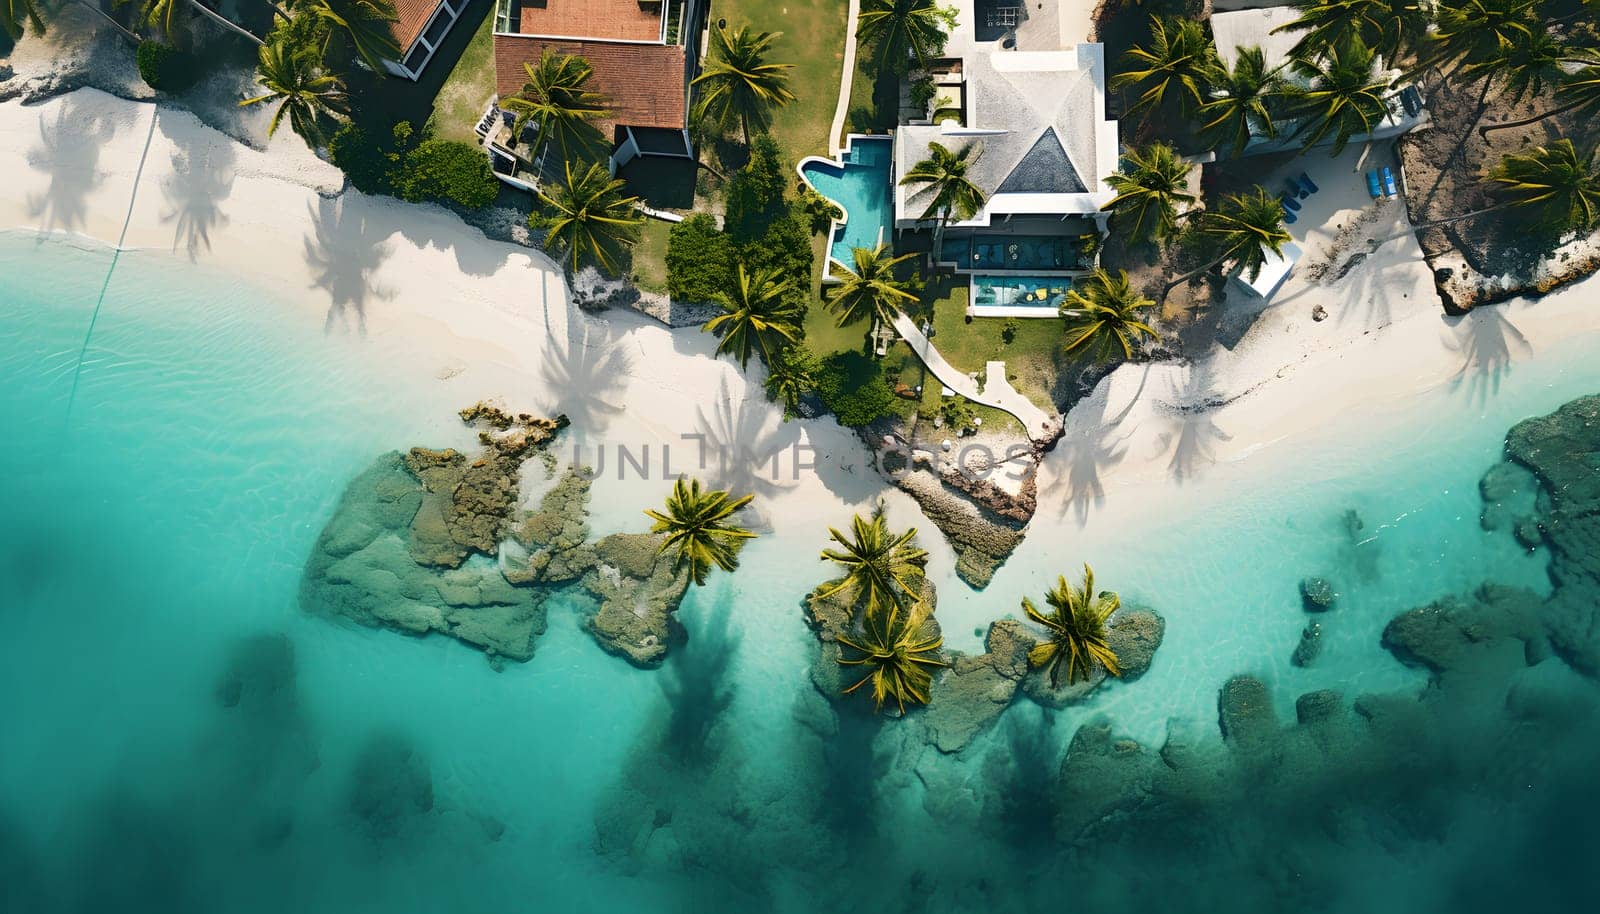 A captivating birds eye view showcases a stunning beachfront home nestled amidst the scenic beauty of palm trees swaying along the shoreline. This aerial shot captures the tranquil ambiance and grandeur of this remarkable coastal sanctuary.